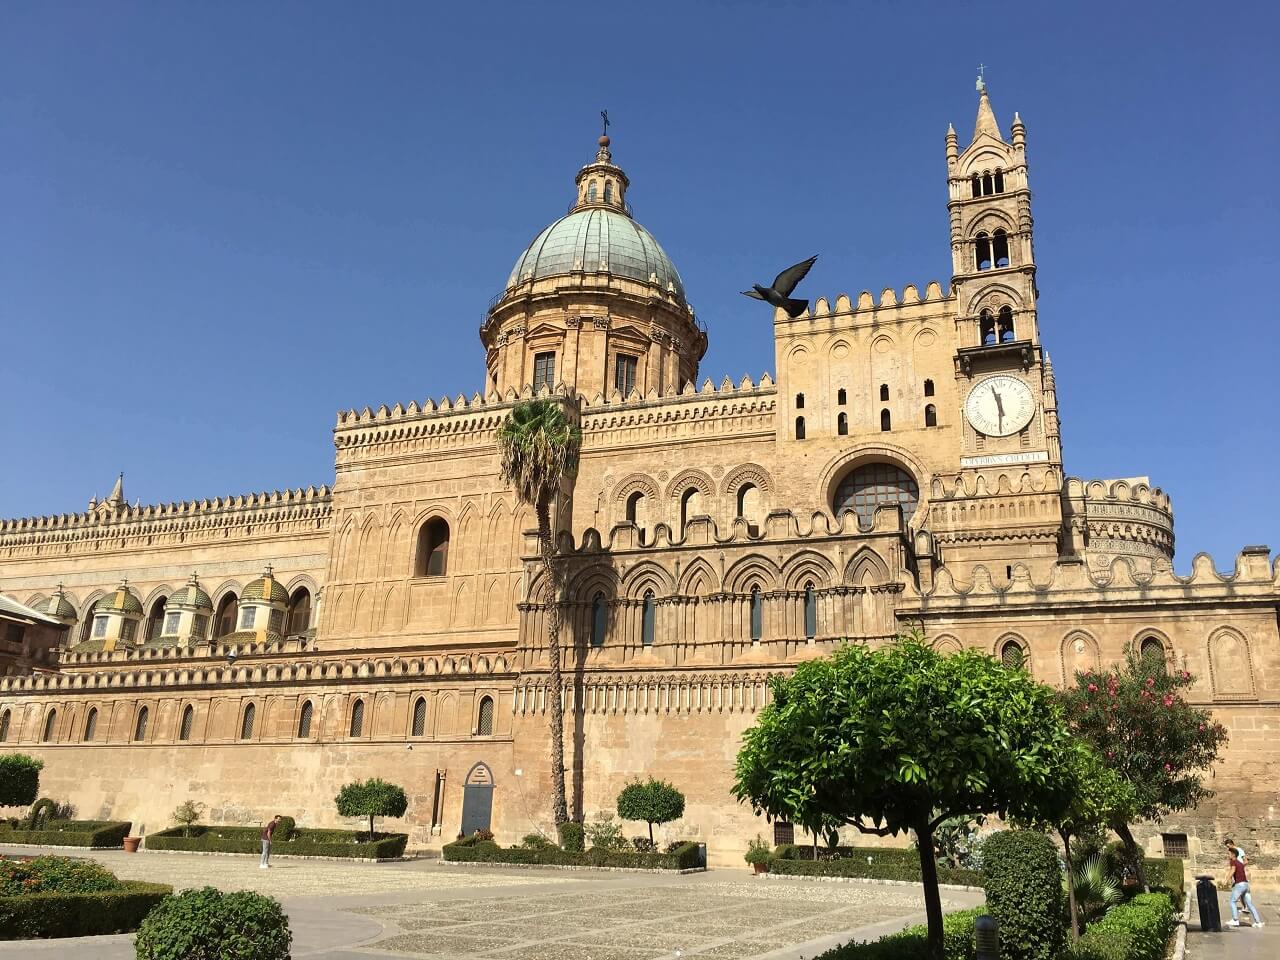 Palermo's magnificent cathedral.